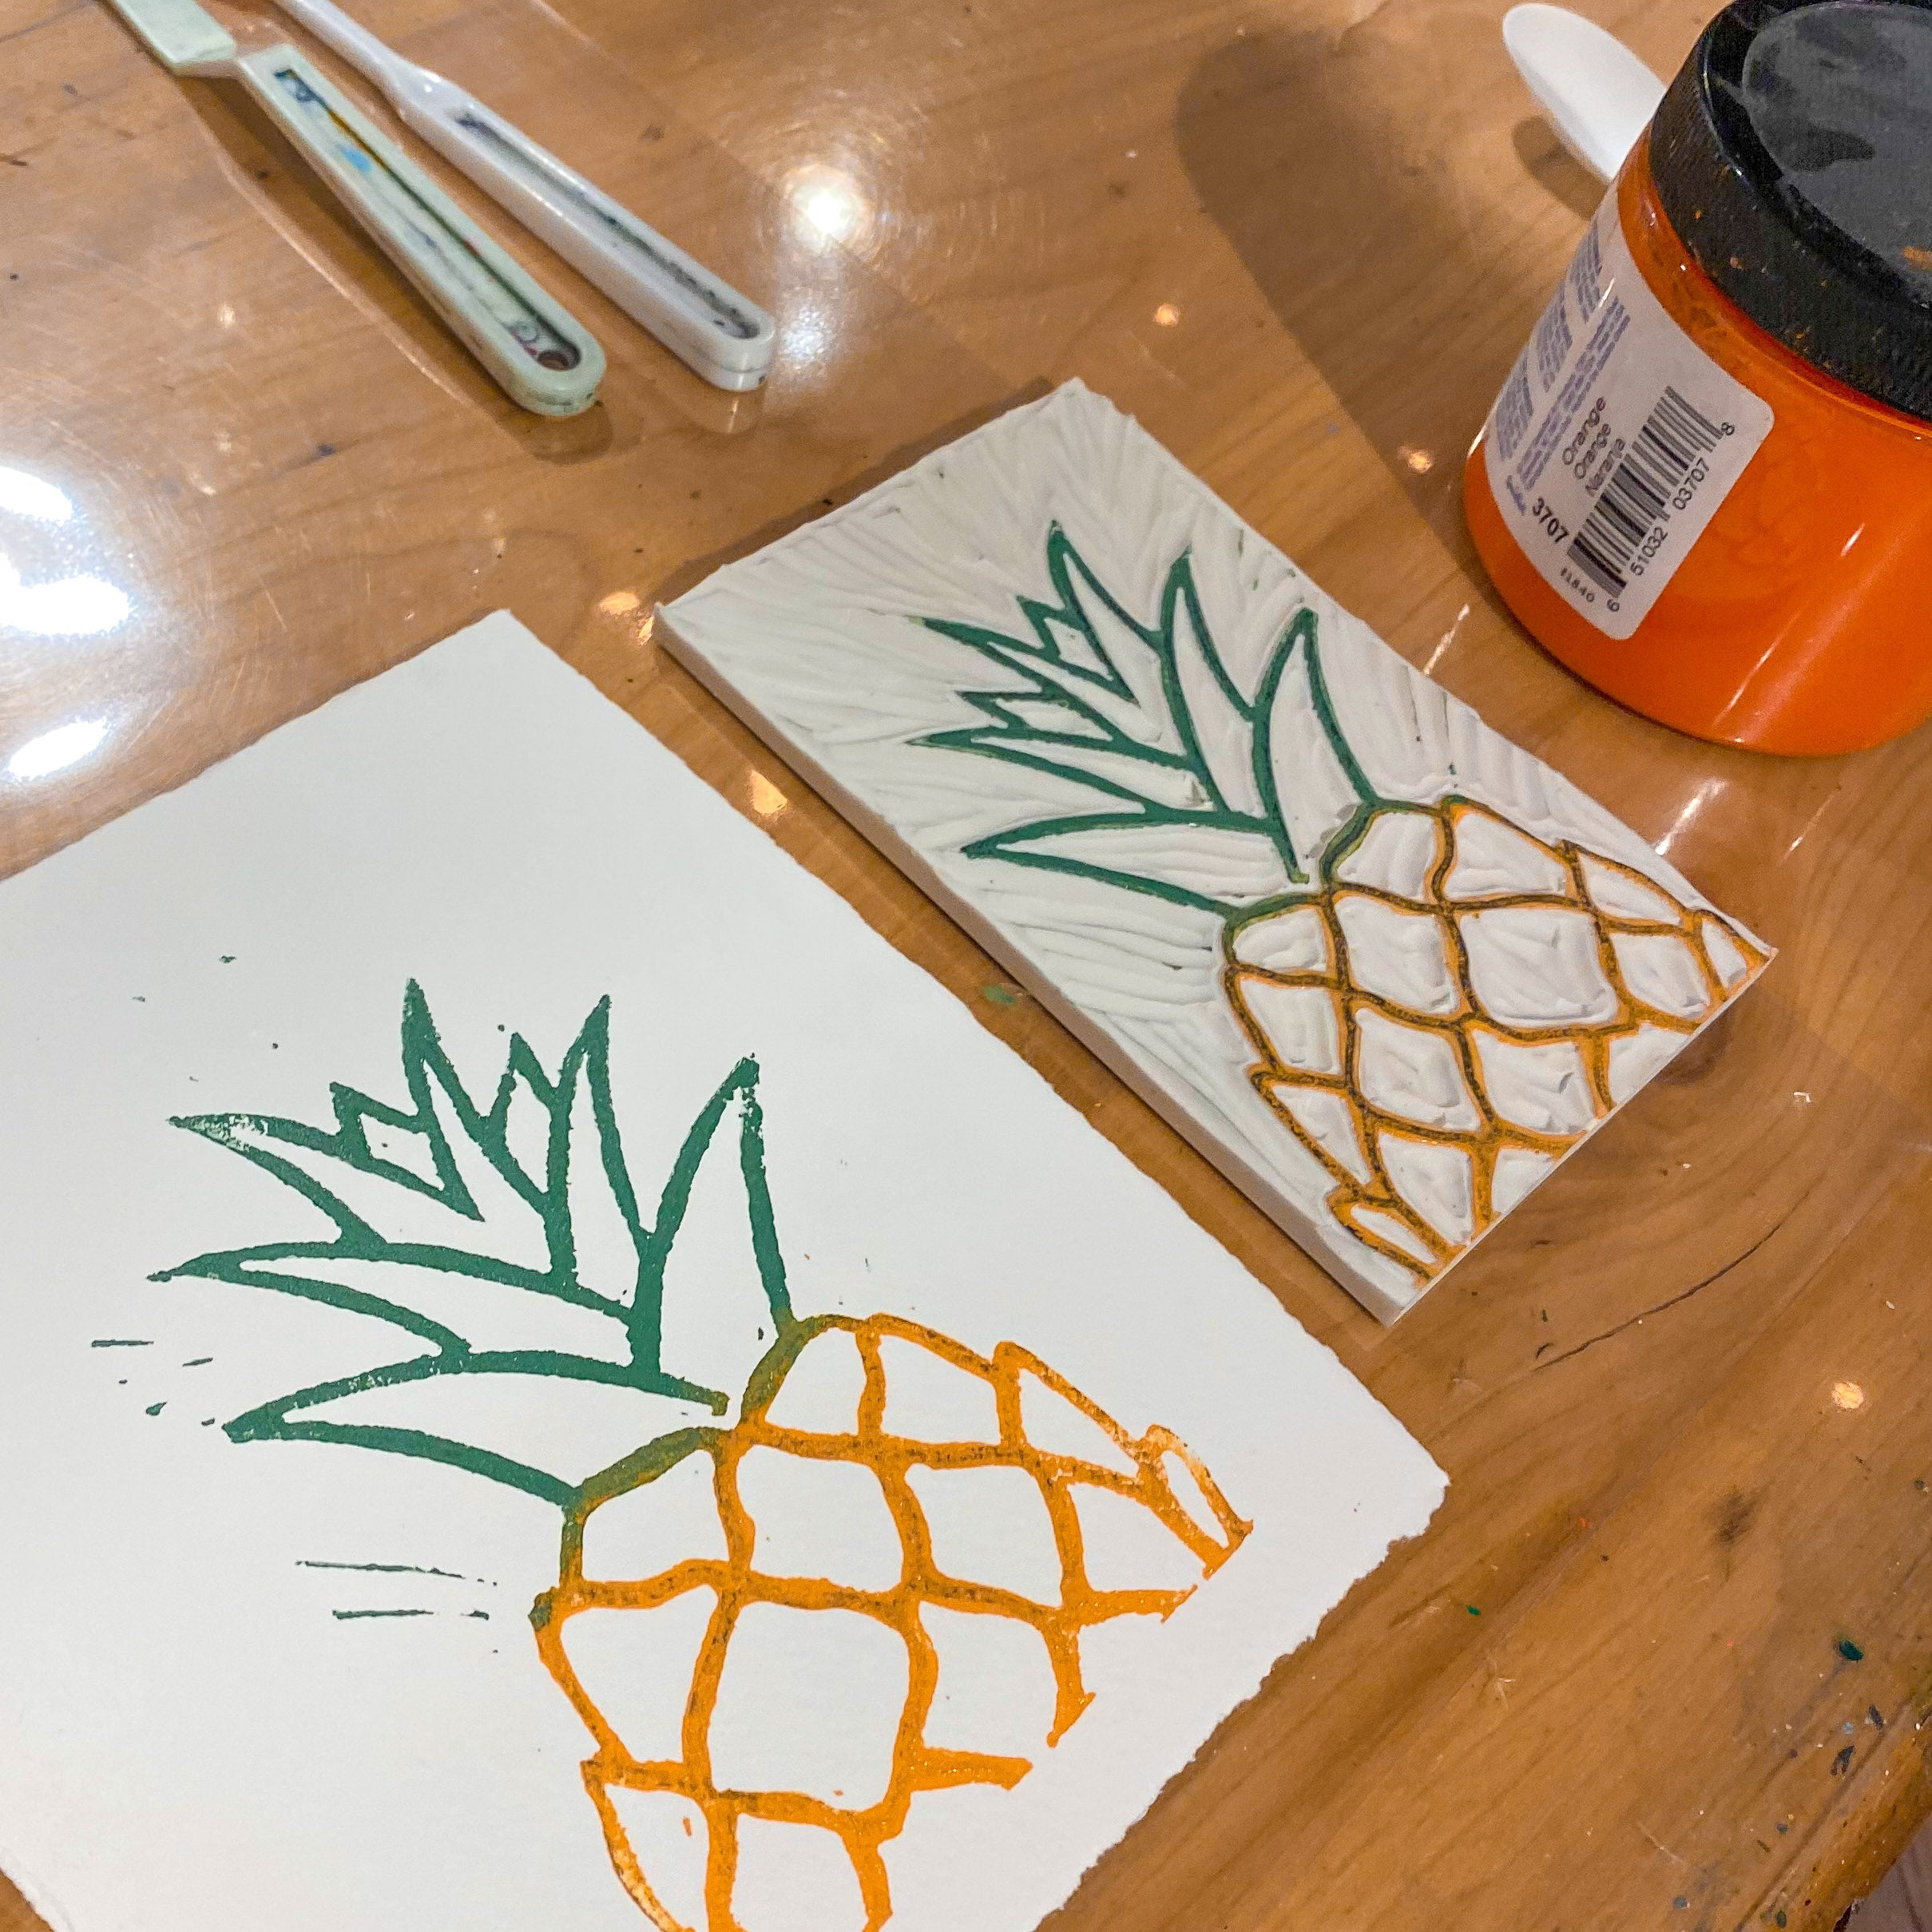 unique night out ideas for adults - paint bar &amp; activities 